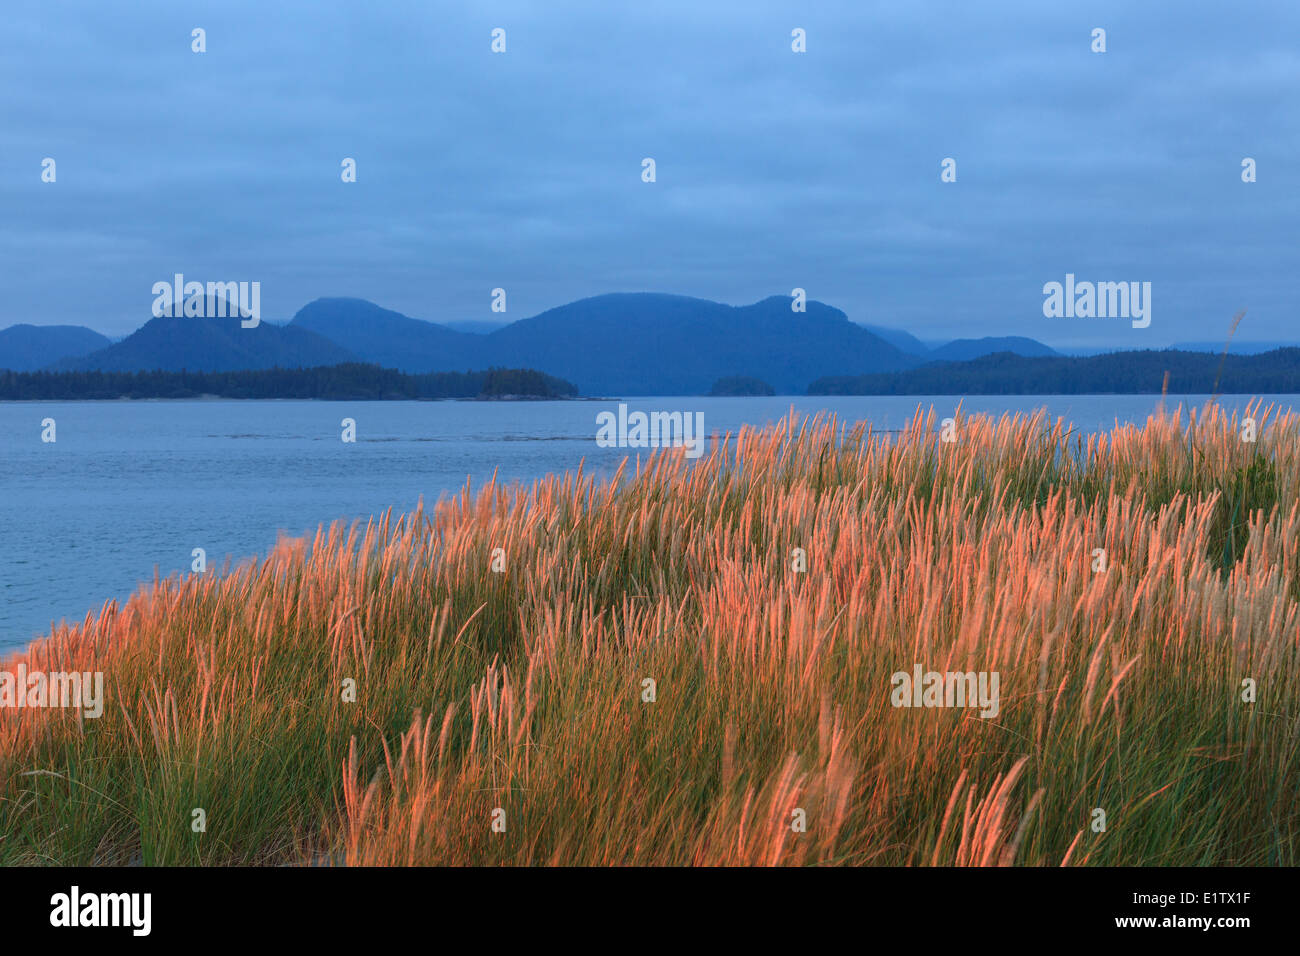 The setting sun illuminates  the dune grass on Whalers Islet, Clayoquot Sound off Vancouver Island, British Columbia Canada. Stock Photo